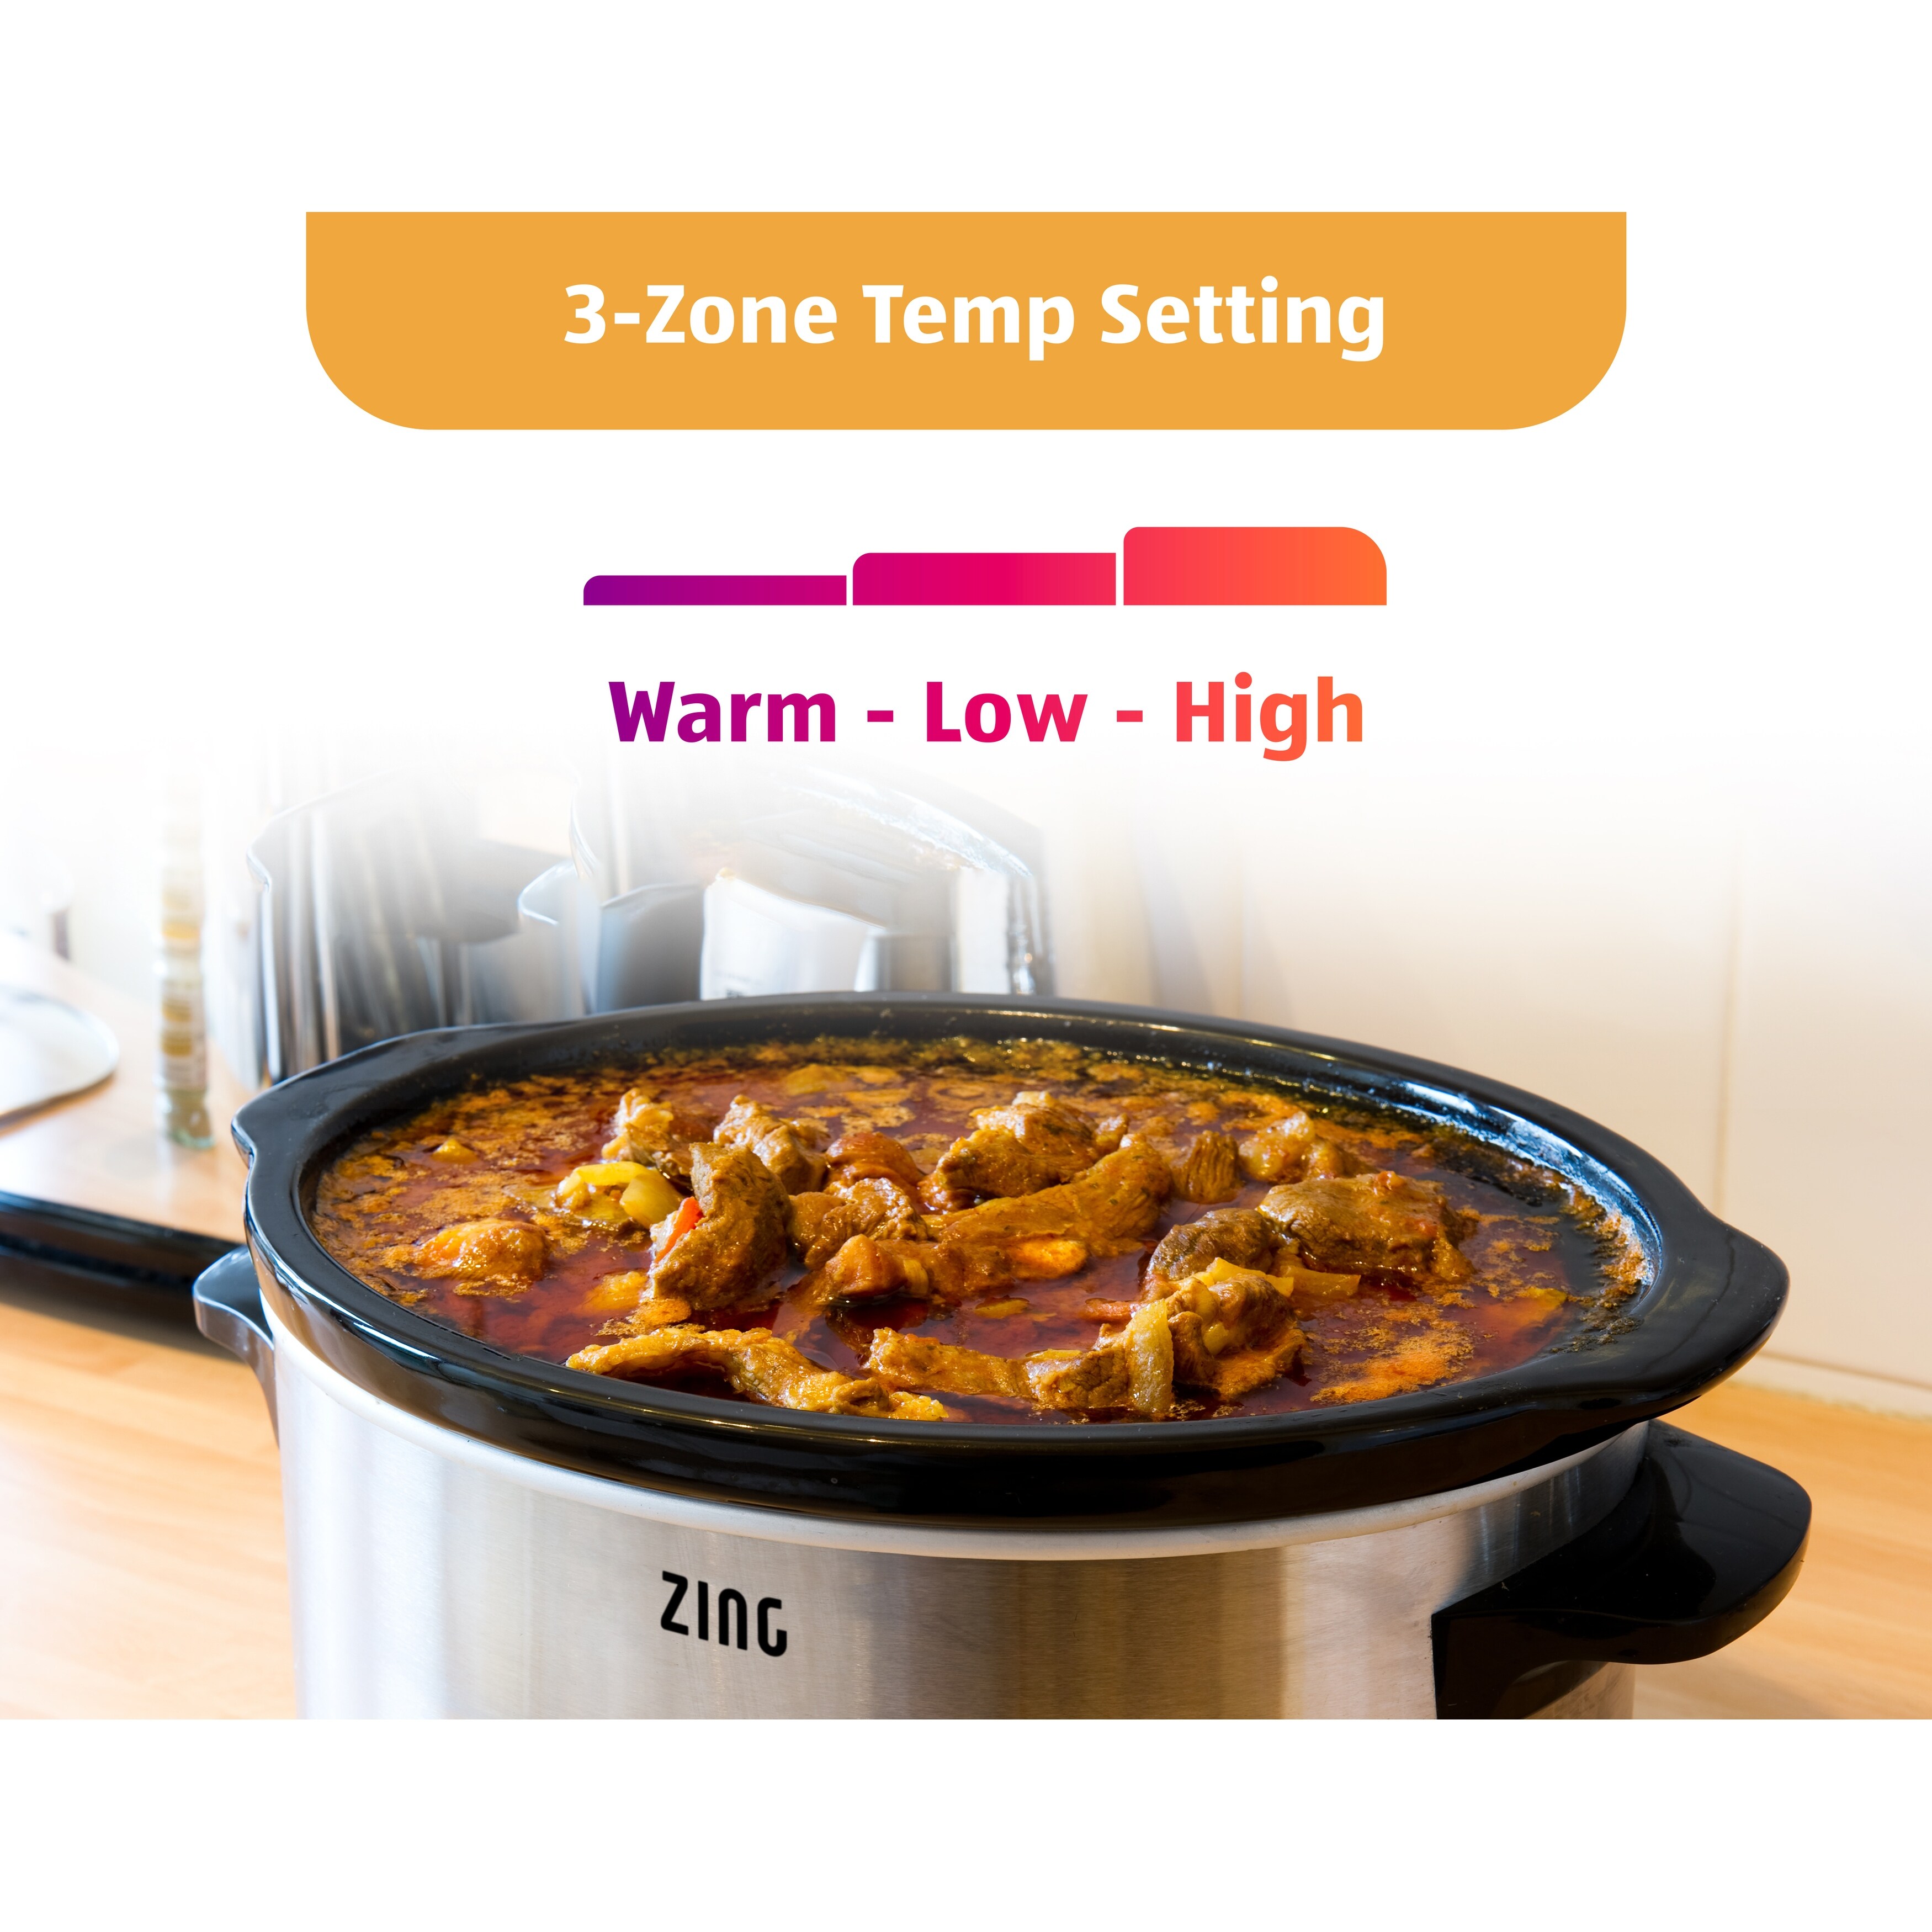 https://ak1.ostkcdn.com/images/products/is/images/direct/a45e7c0fb70bcbf7846e0c04c1e3bc0f51c5e52c/Zing-6-Quart-Digital-Programmable-Slow-Cooker.jpg